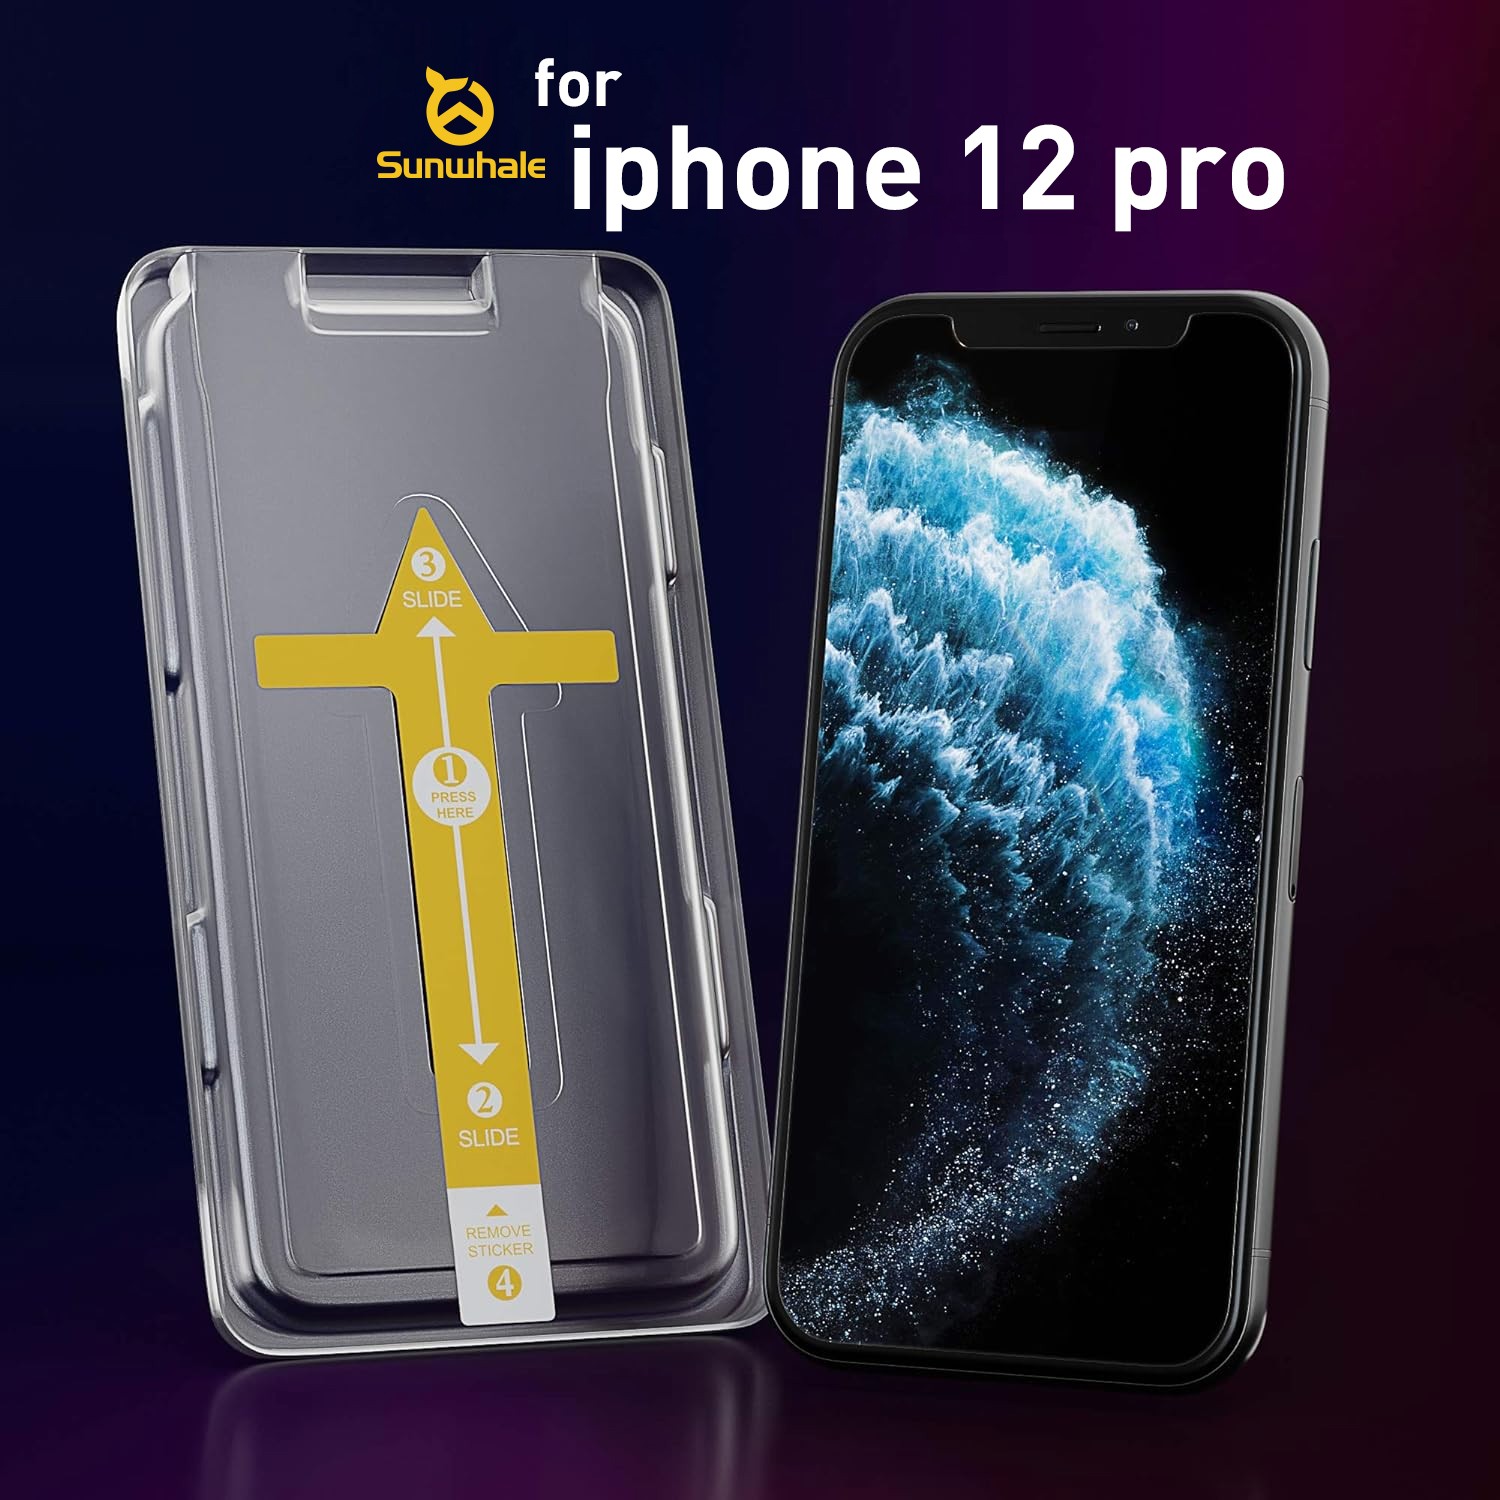 Mobile-Phone-Accessories-Sunwhale-for-iPhone-12-pro-max-Screen-Protector-Auto-Alignment-Kit-37